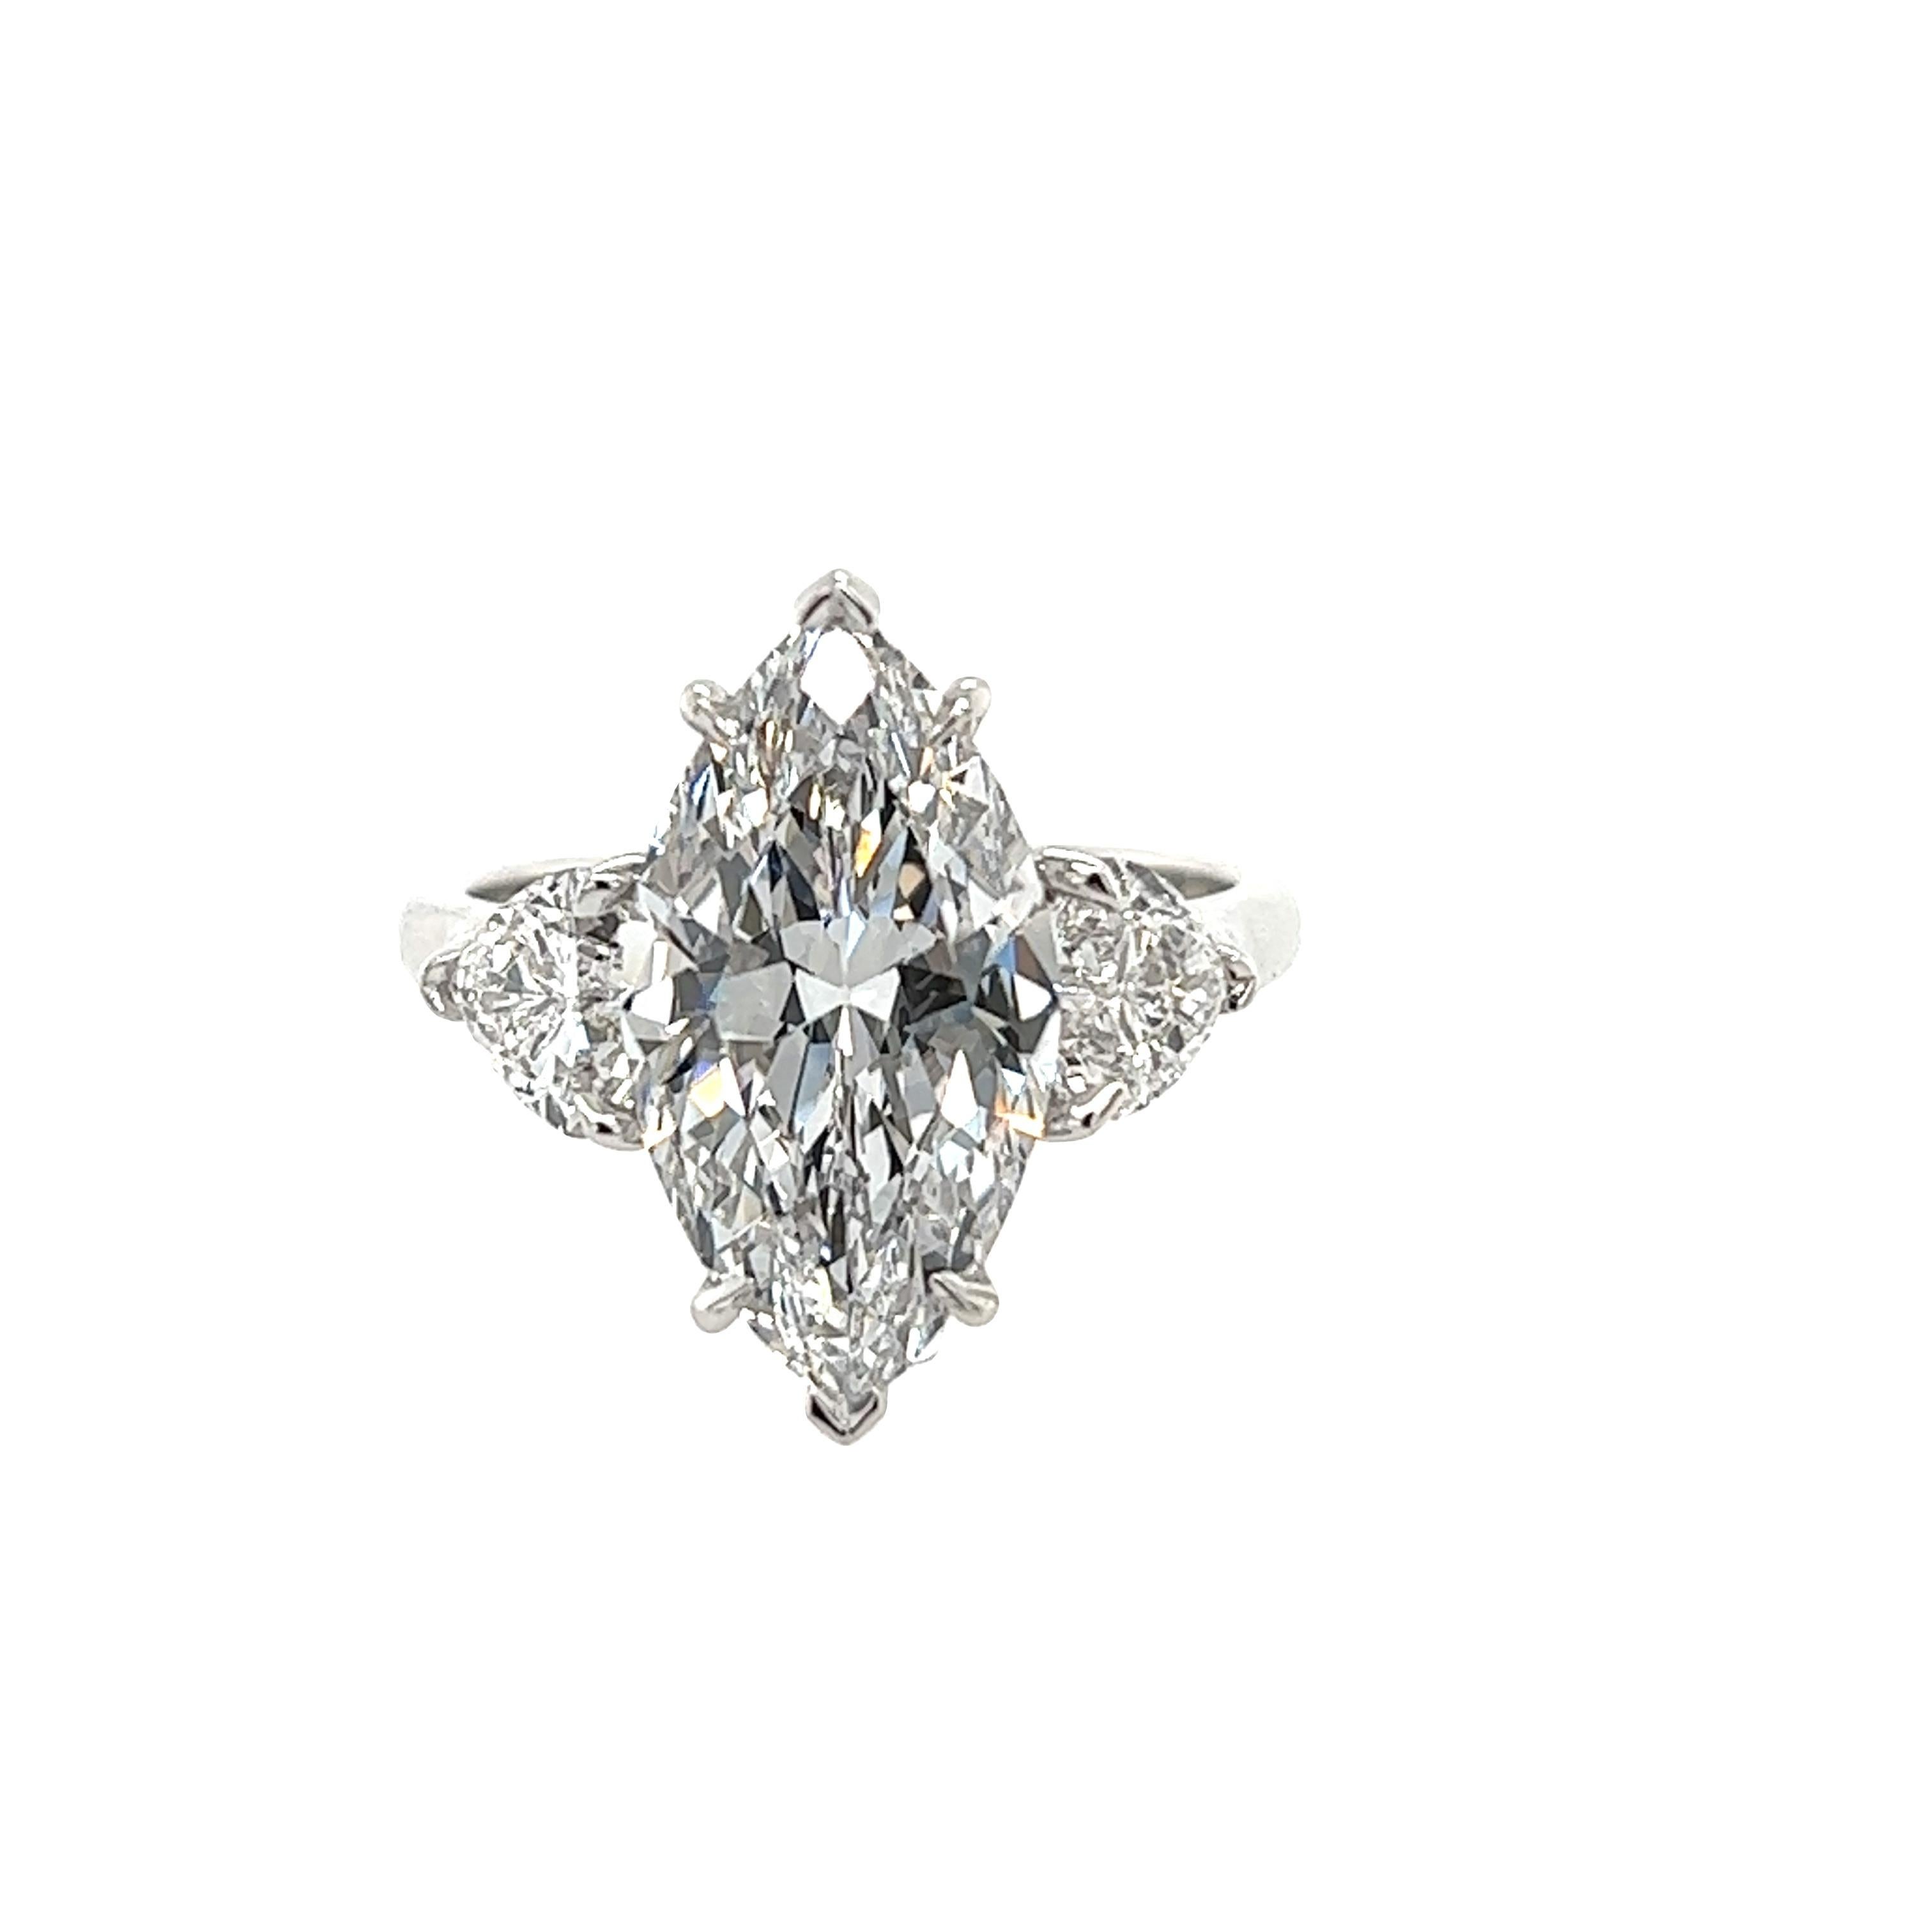 Rosenberg Diamonds & Co. 4.96 carat Marquise shape D color Type II B Internally Flawless clarity is accompanied by a GIA certificate. This mesmerizing prefect marquise is full of life and is extremely rare. It is set in a handmade platinum setting